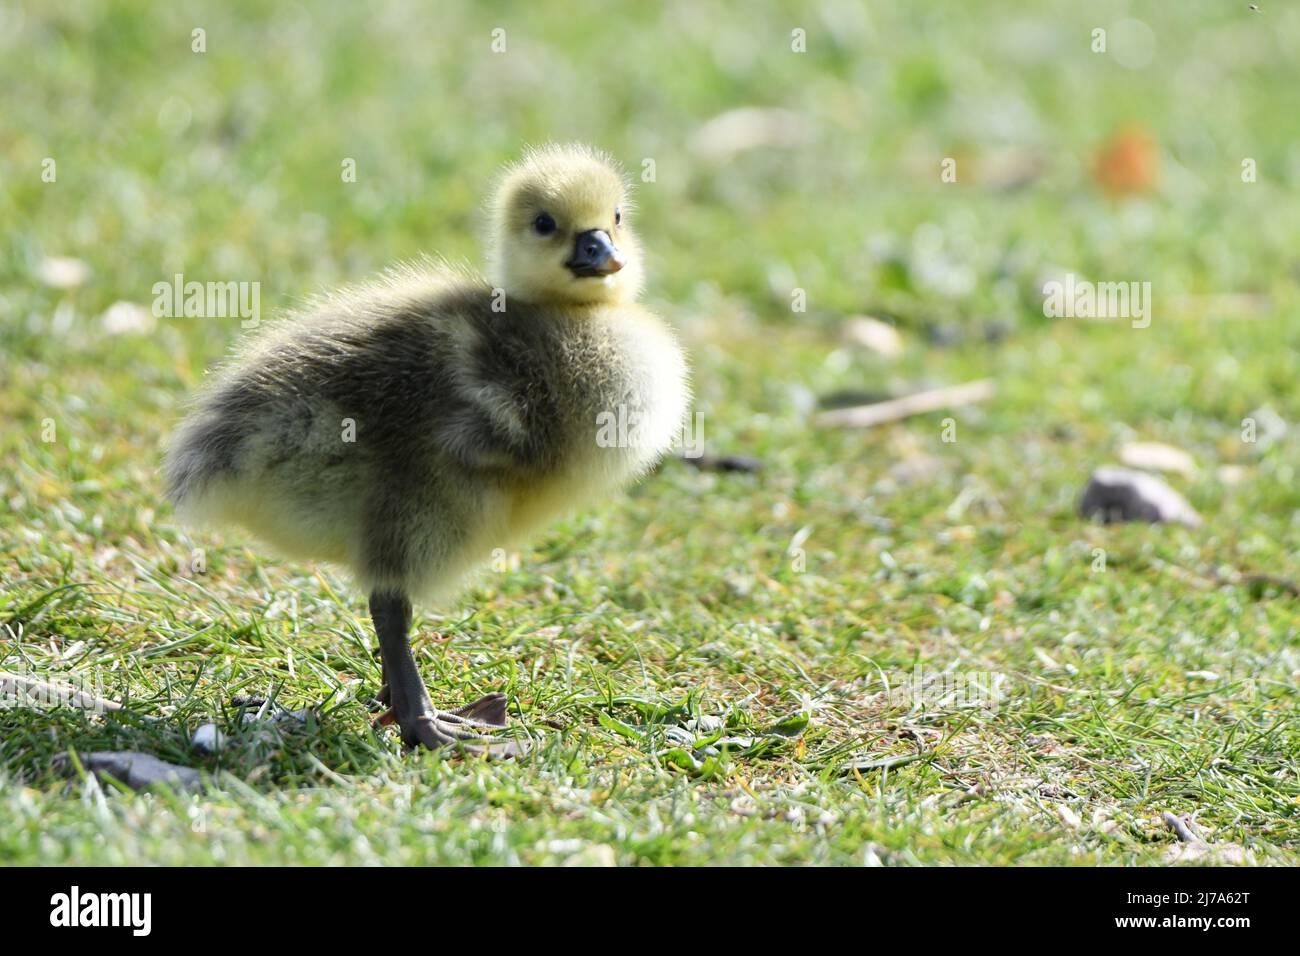 Lone gosling at Spring at Tring Reservoirs. Greylag goose. Stock Photo